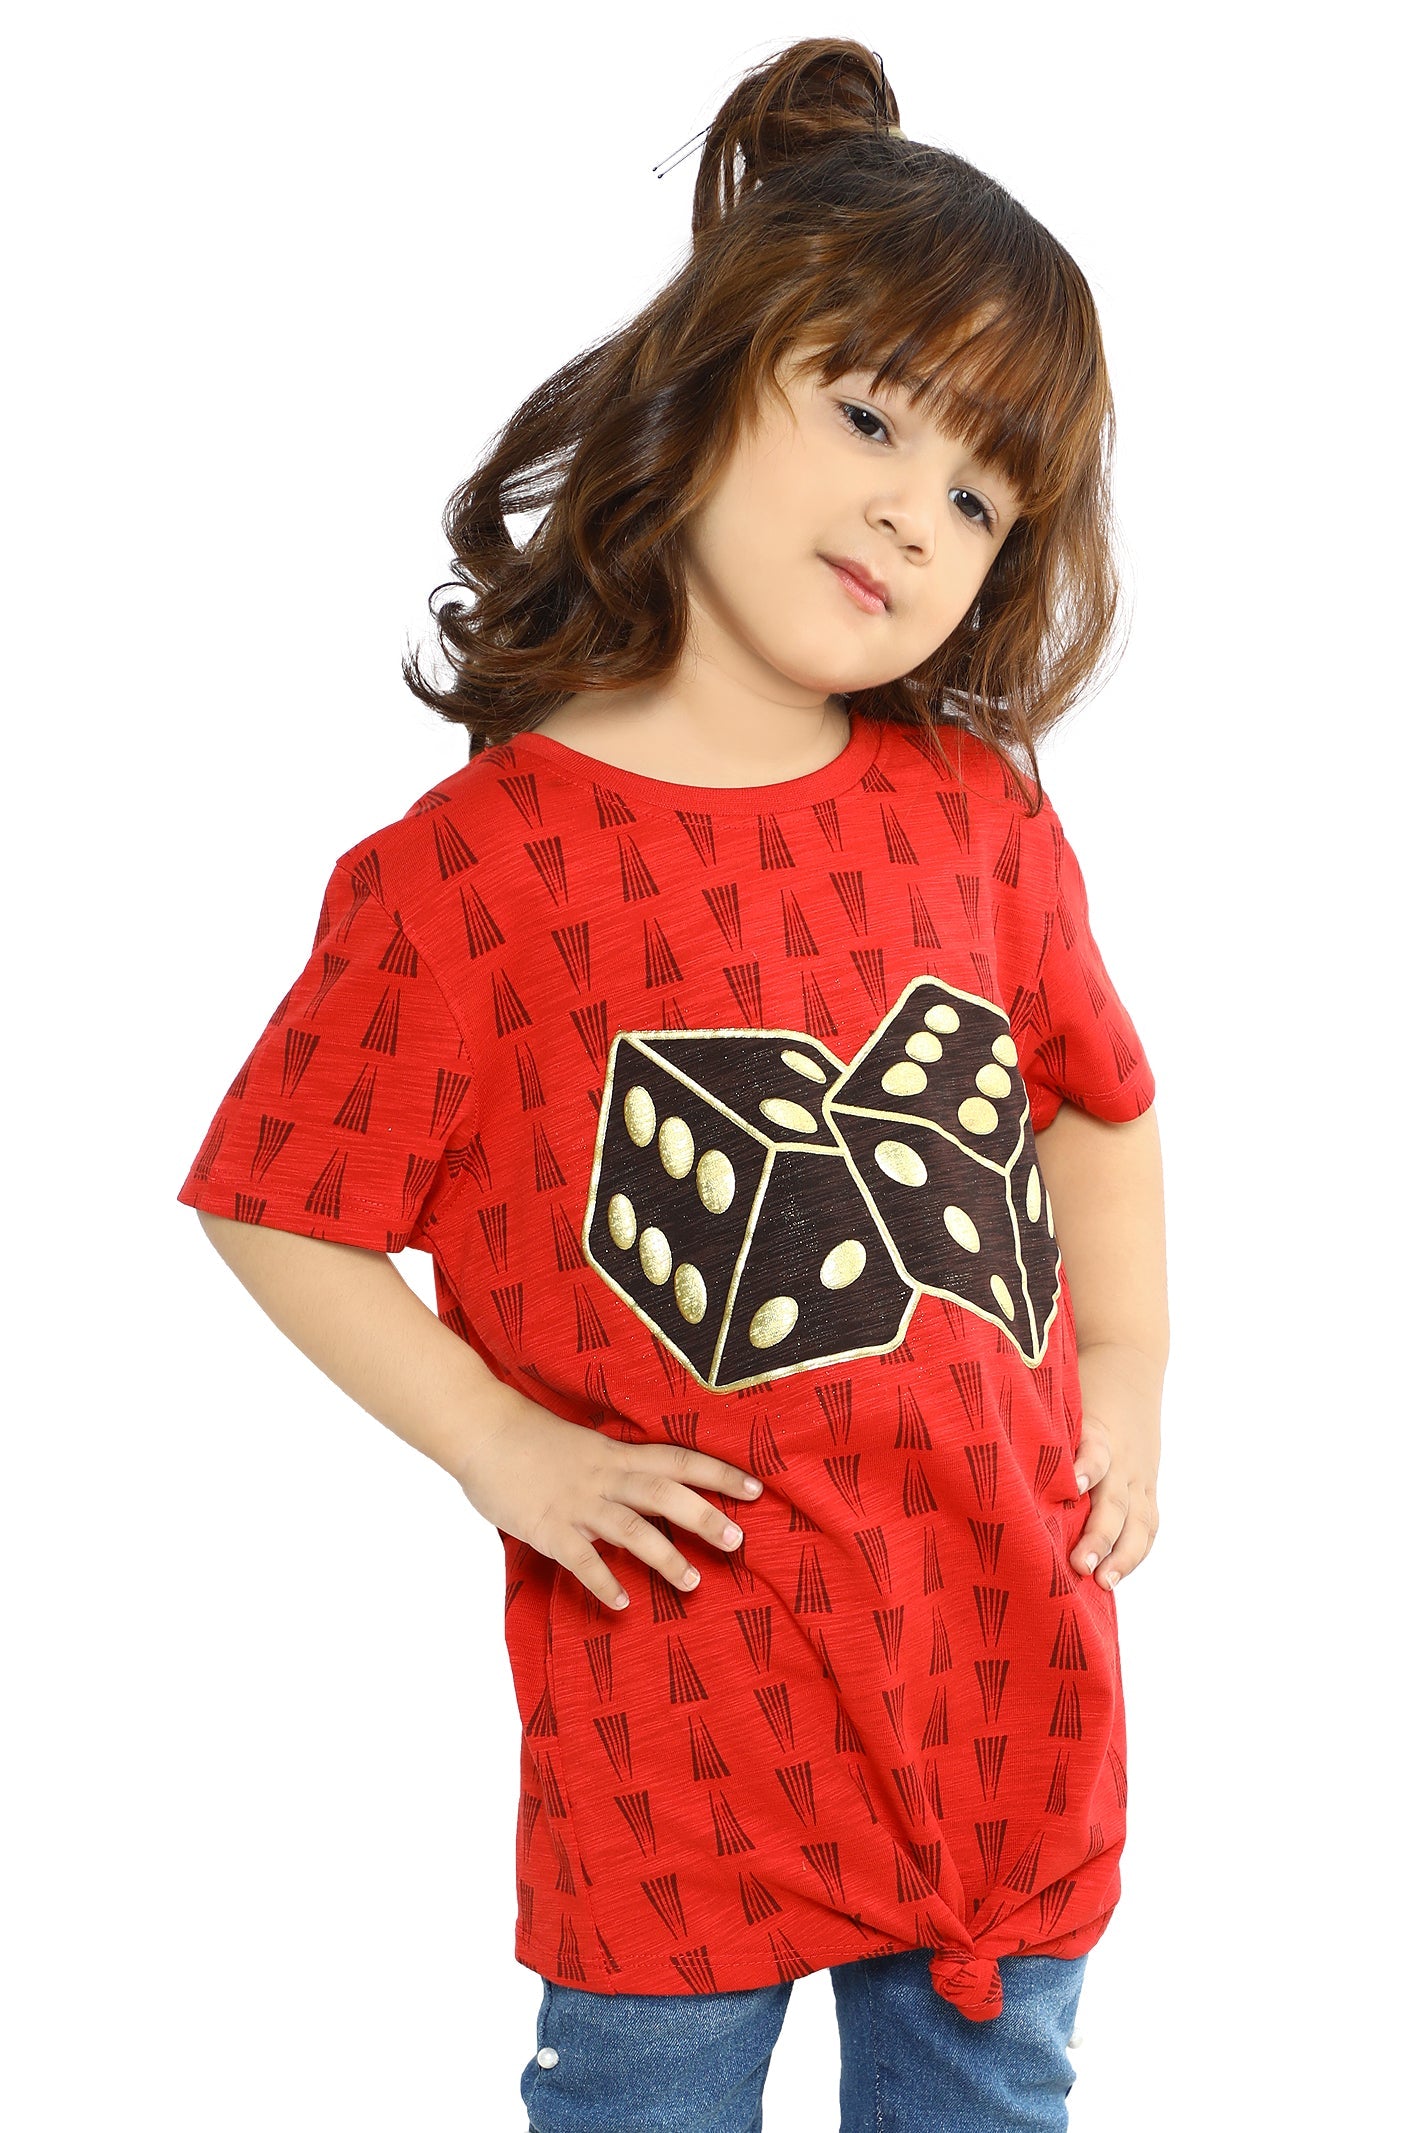 Girls T-Shirt In Red SKU: KGA-0227-RED - Diners